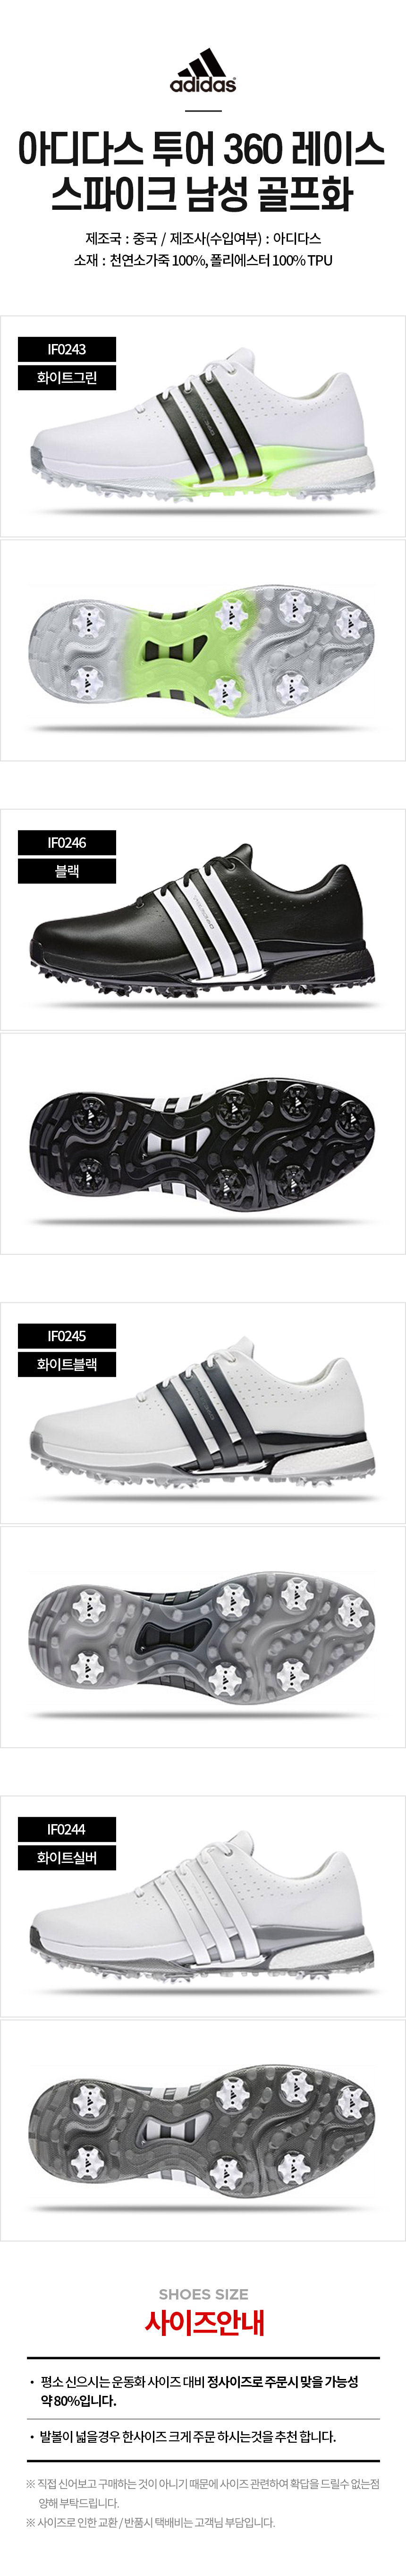 adidas_tour_360_lace_spike_m_golf_shoes_24.jpg